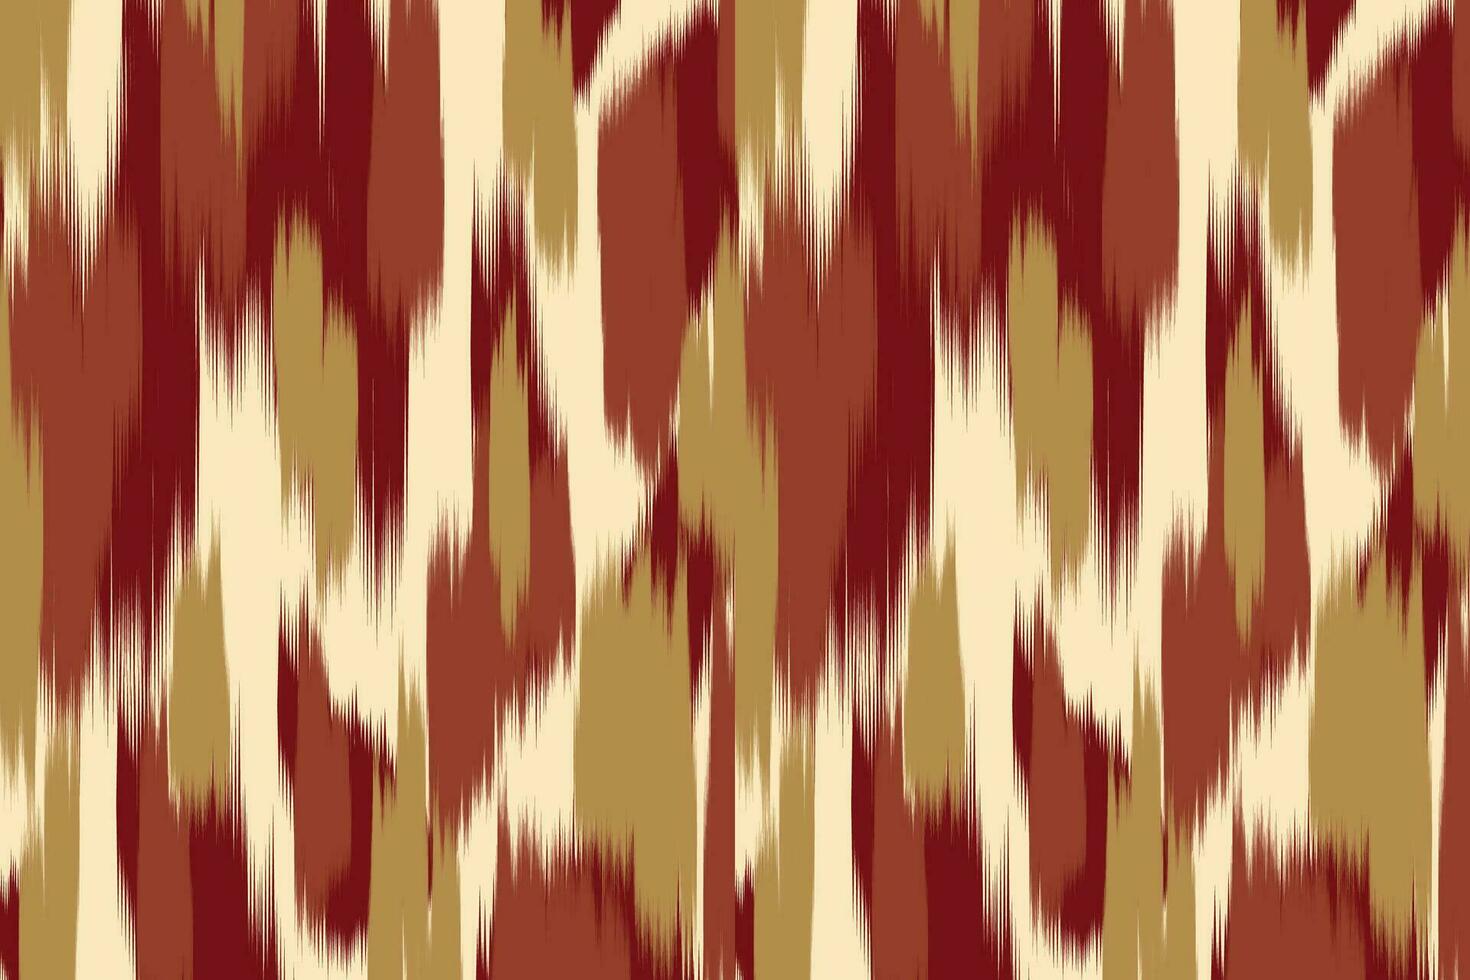 Uzbek ikat pattern and fabric in Uzbekistan. Abstract background for wallpaper, textures, textile, wrapping paper. vector